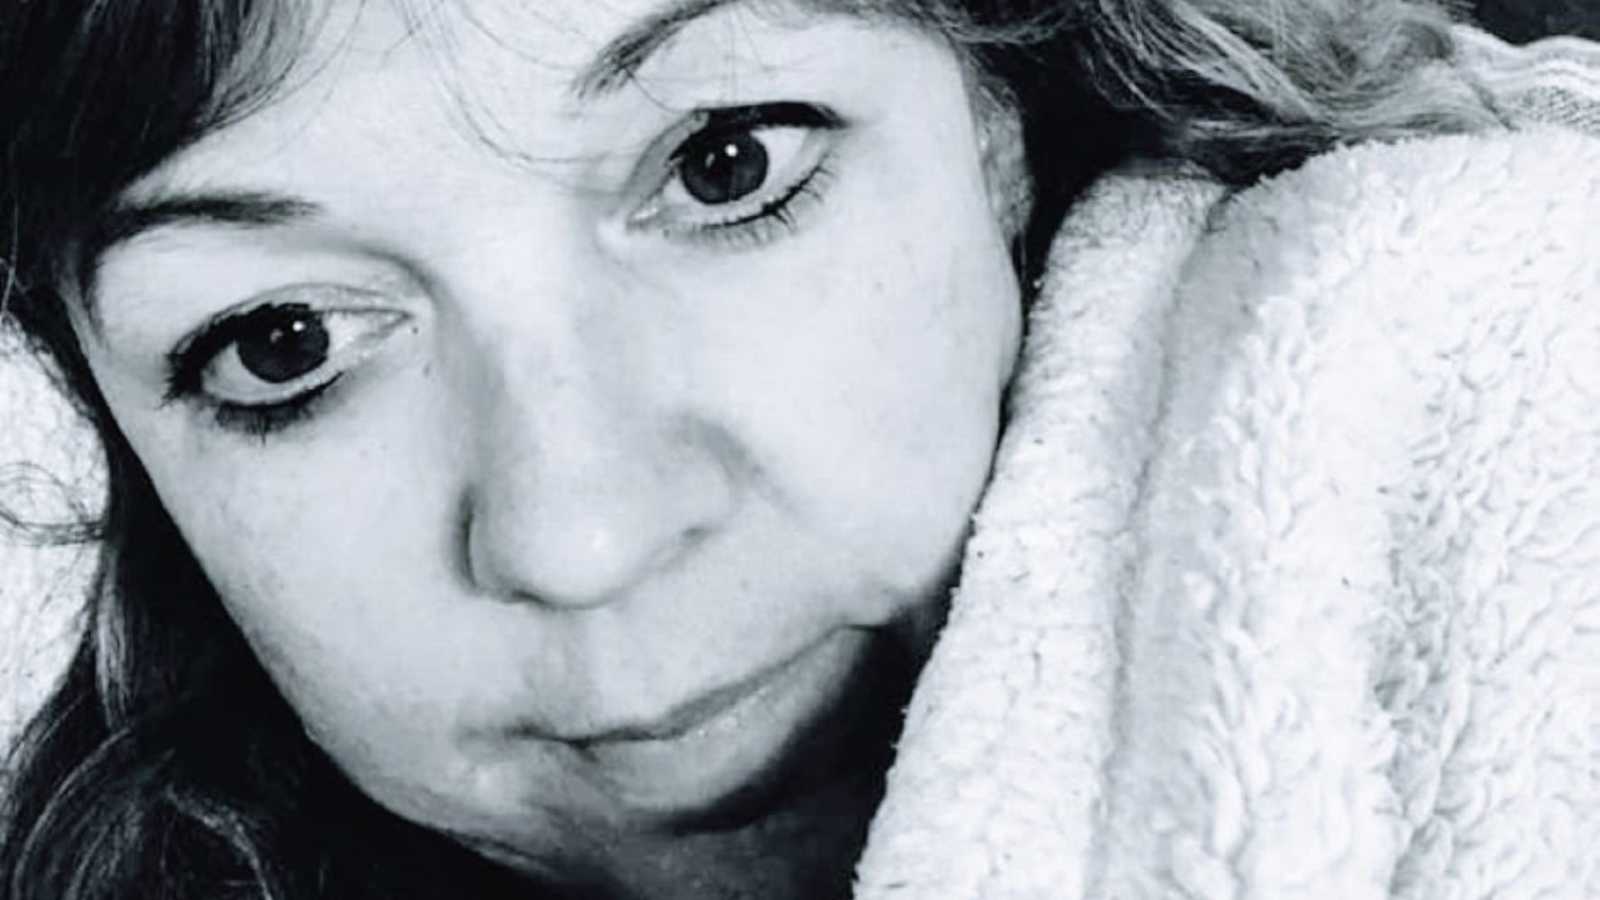 Woman takes serious selfie while curled up in a fluffy blanket to advocate for mental health during the pandemic